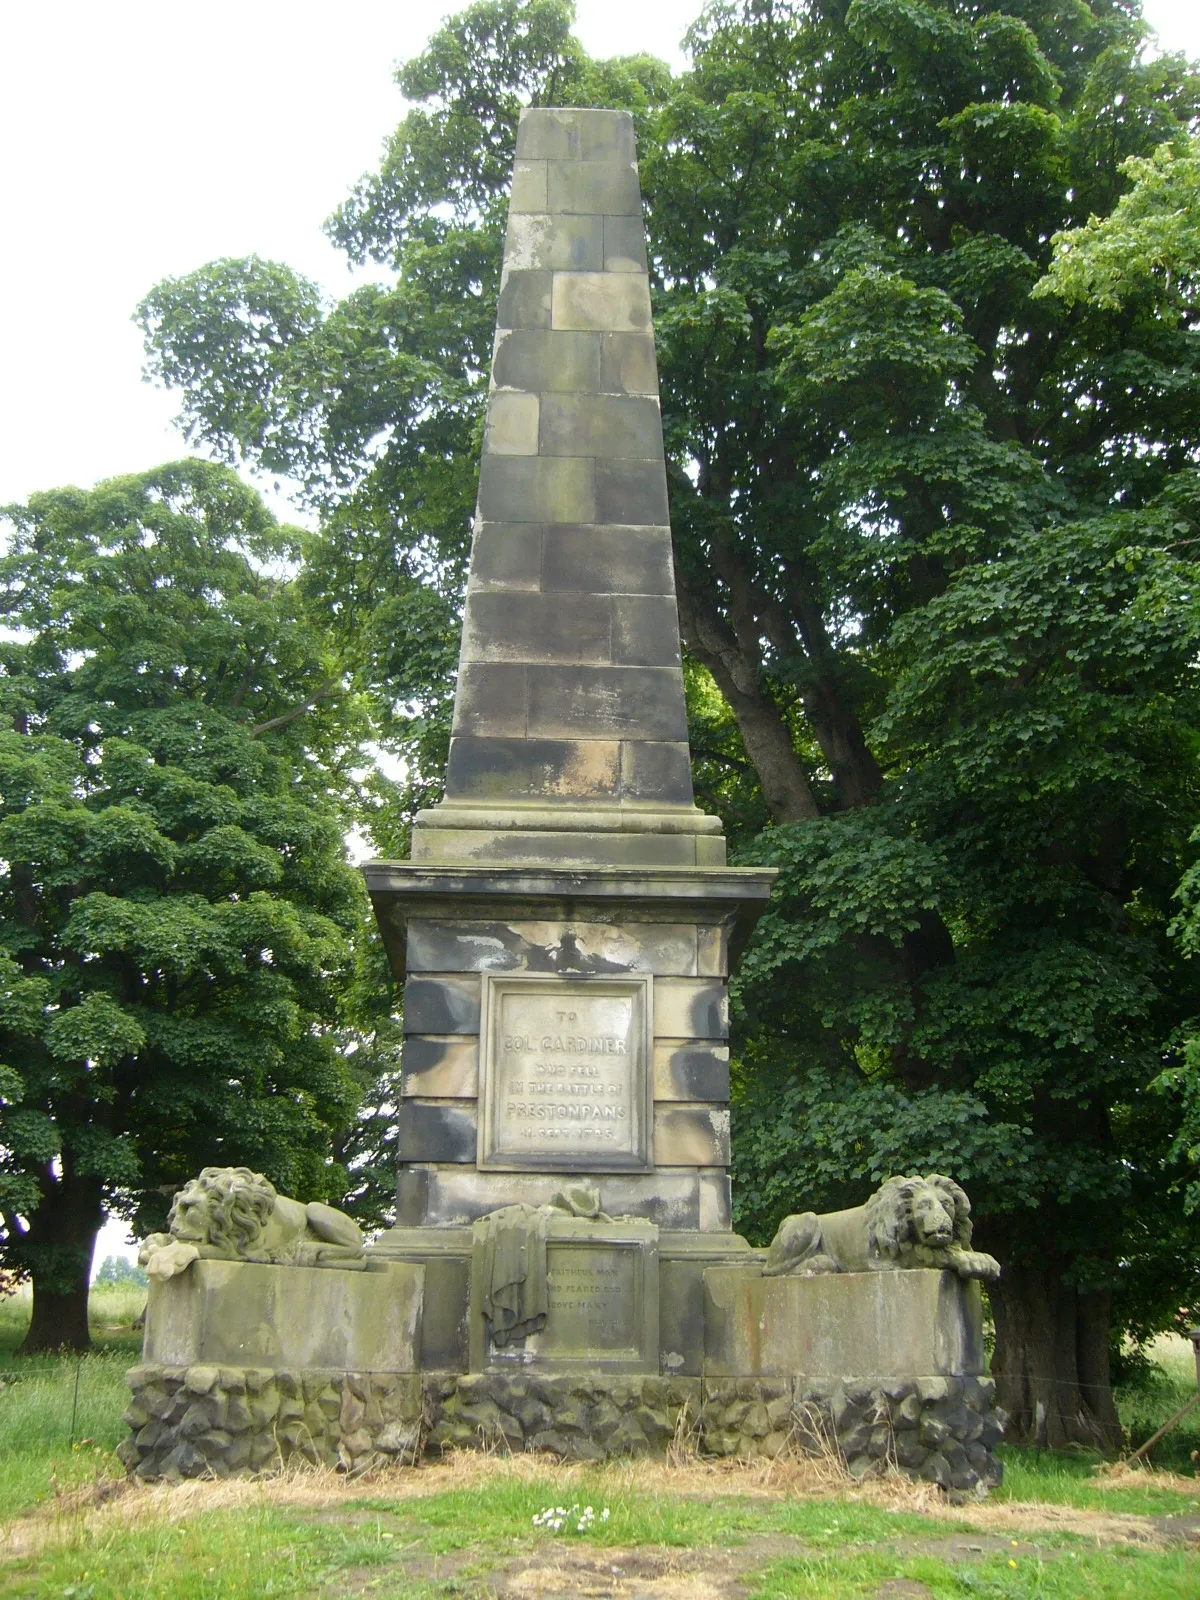 Photo showing: Monument to a Colonel of Dragoons, killed at the Battle of Prestonpans in 1745.